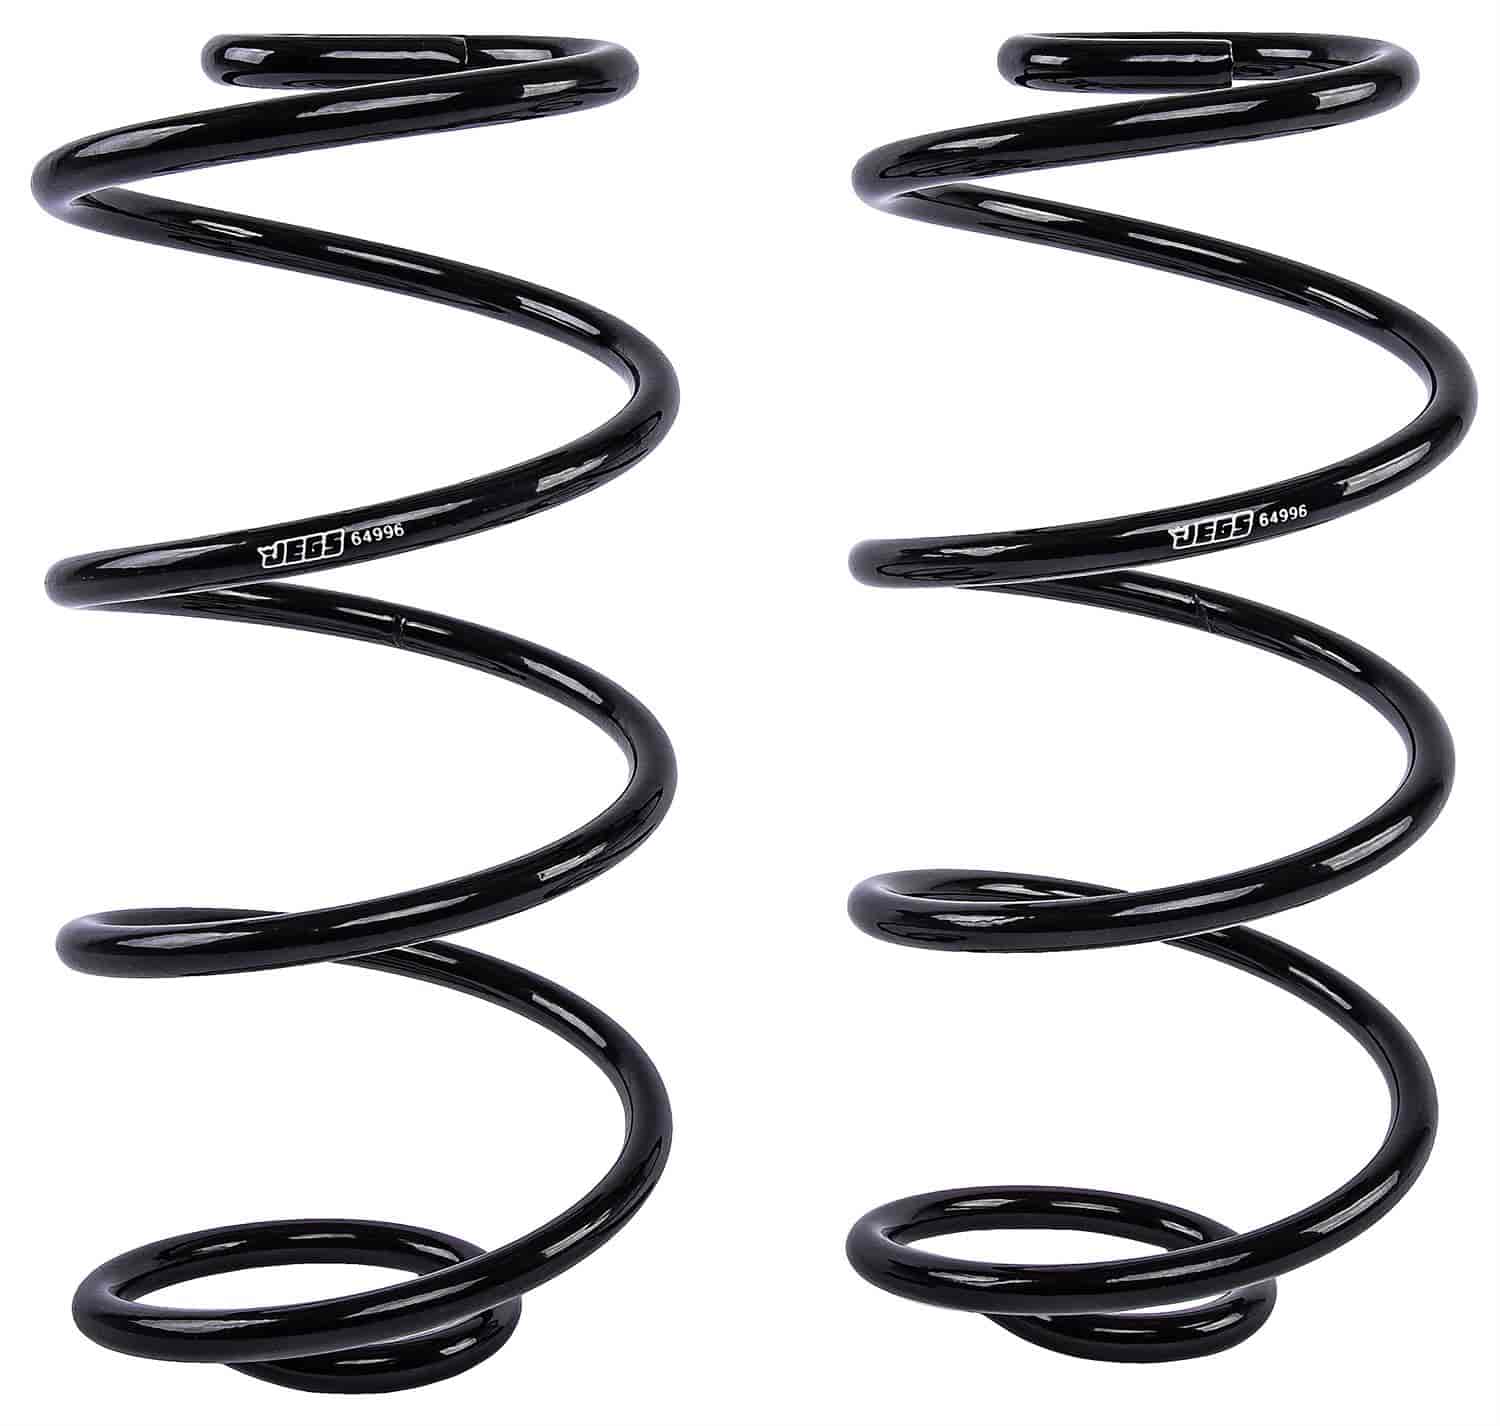 JEGS 64996: Replacement Coil Springs | Chevy 1967-1970 Chevelle